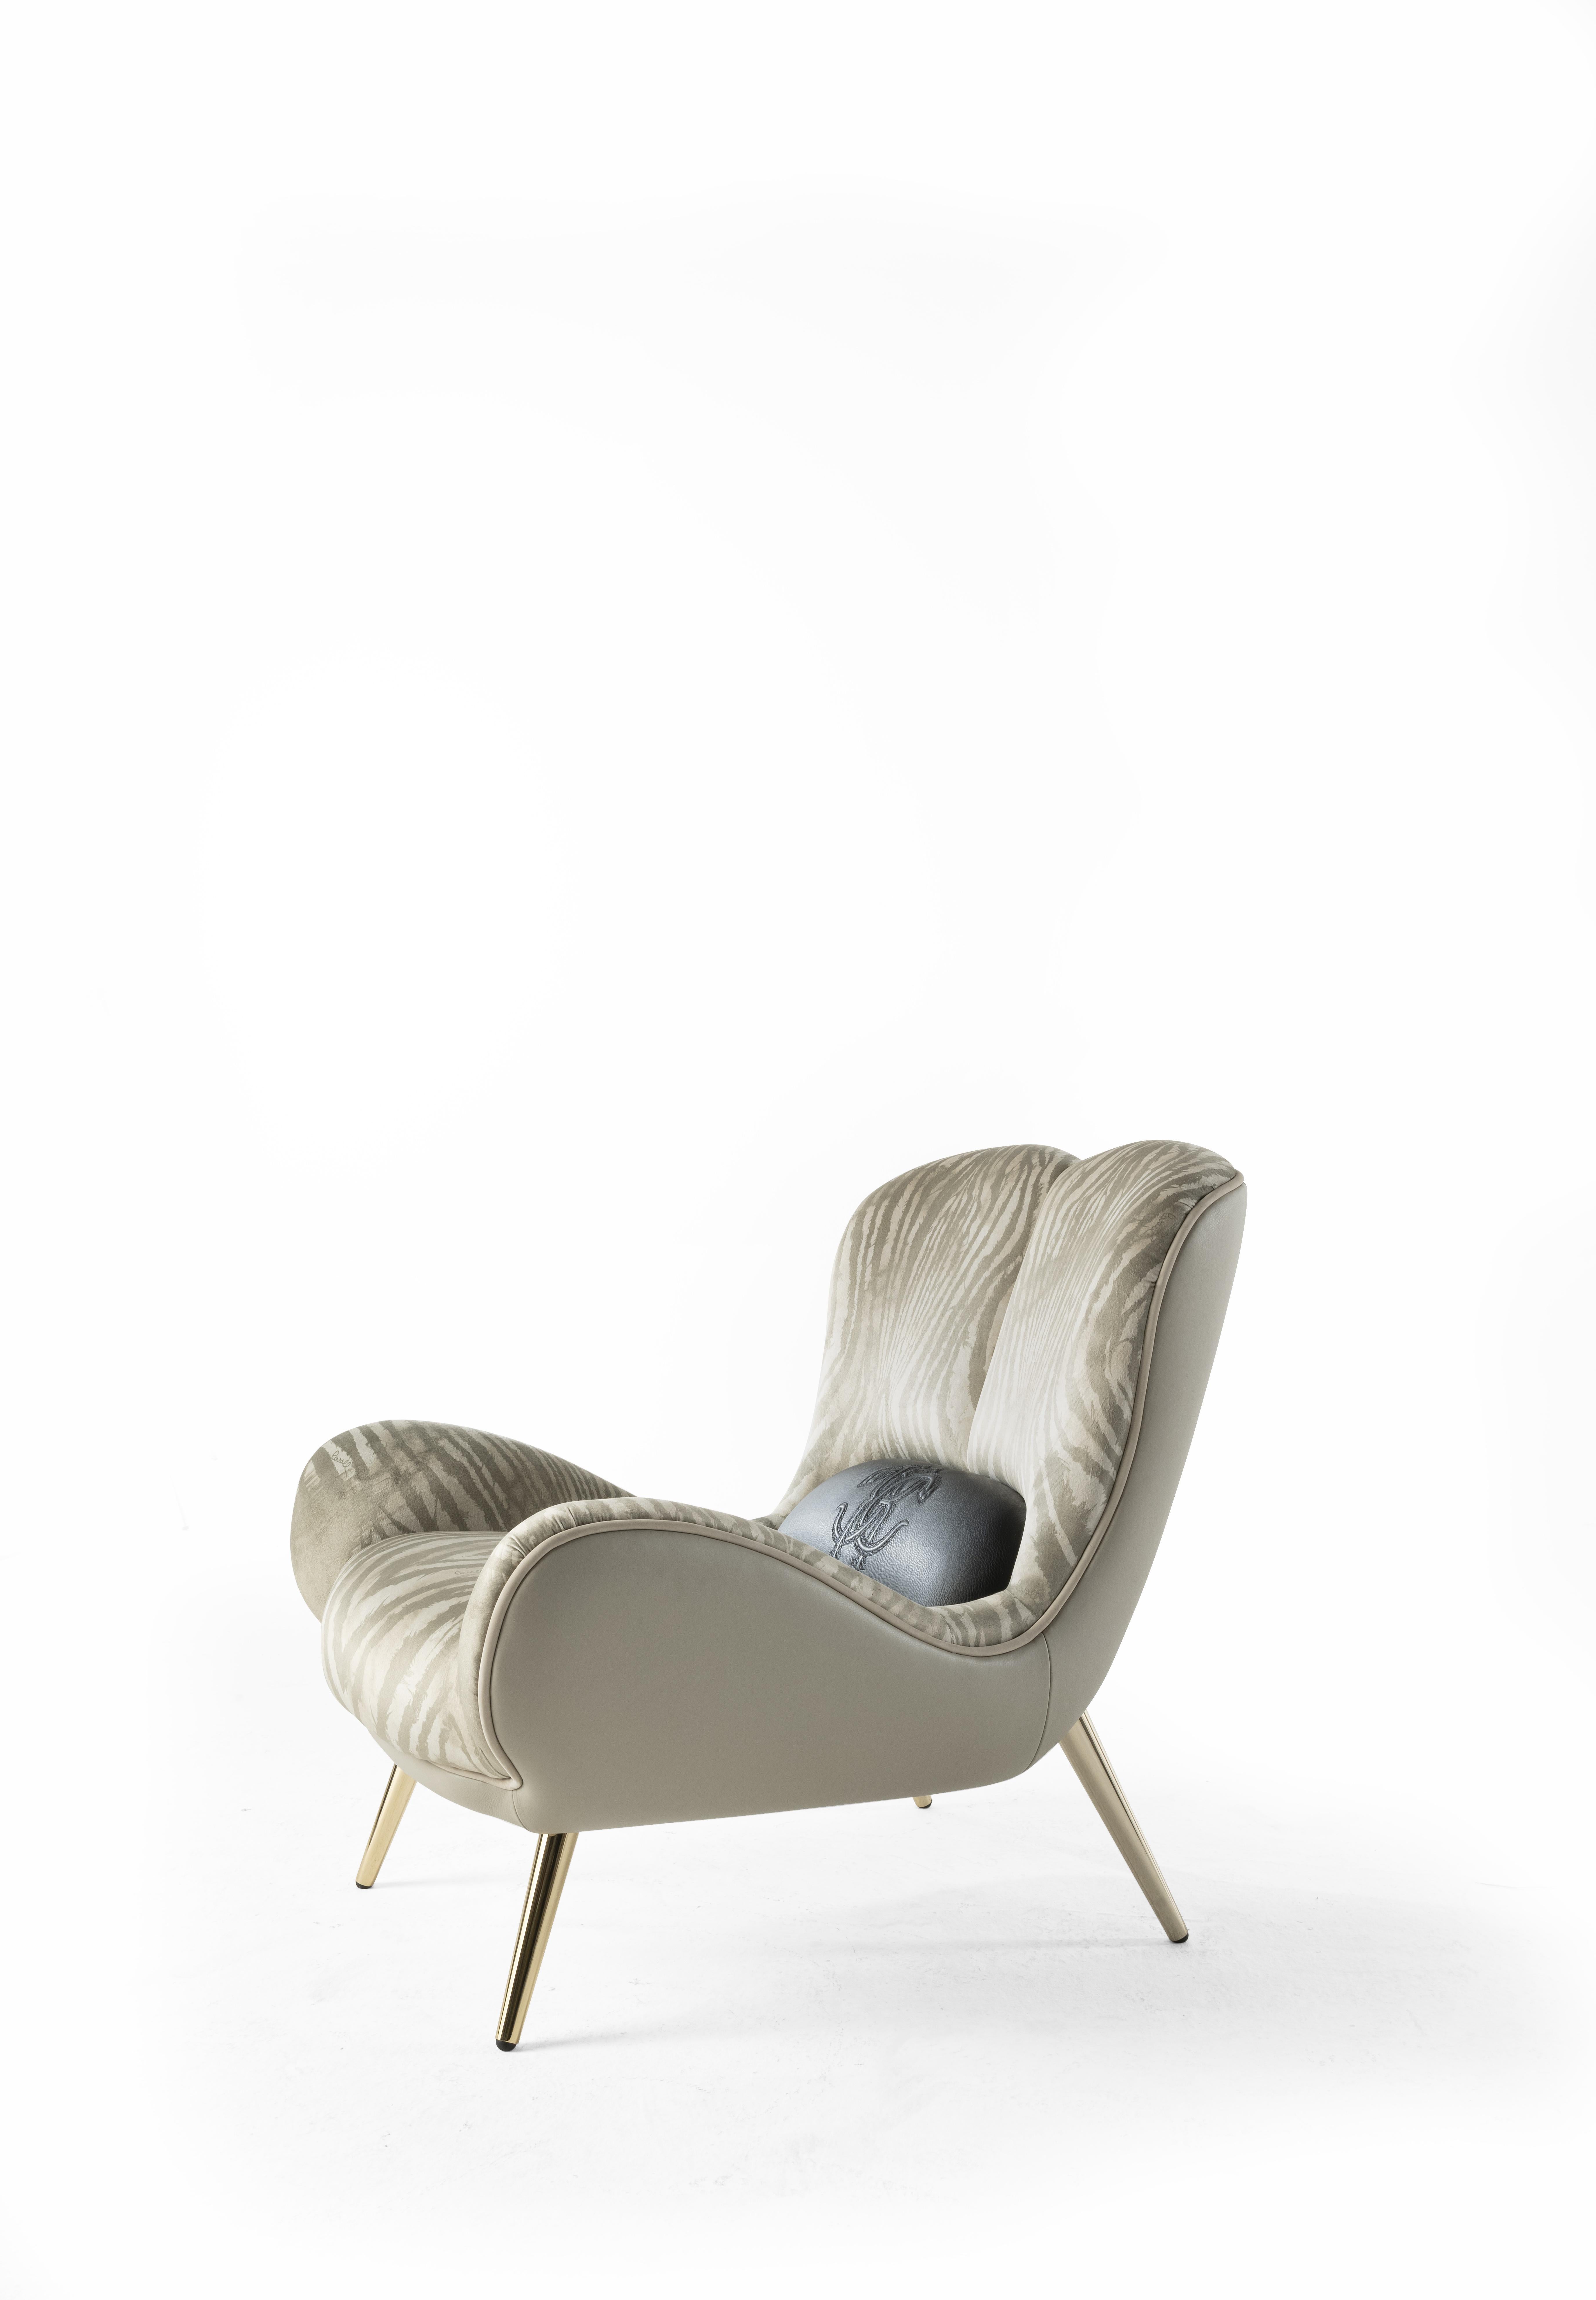 Modern 21st Century Tifnit Armchair in Leather by Roberto Cavalli Home Interiors For Sale